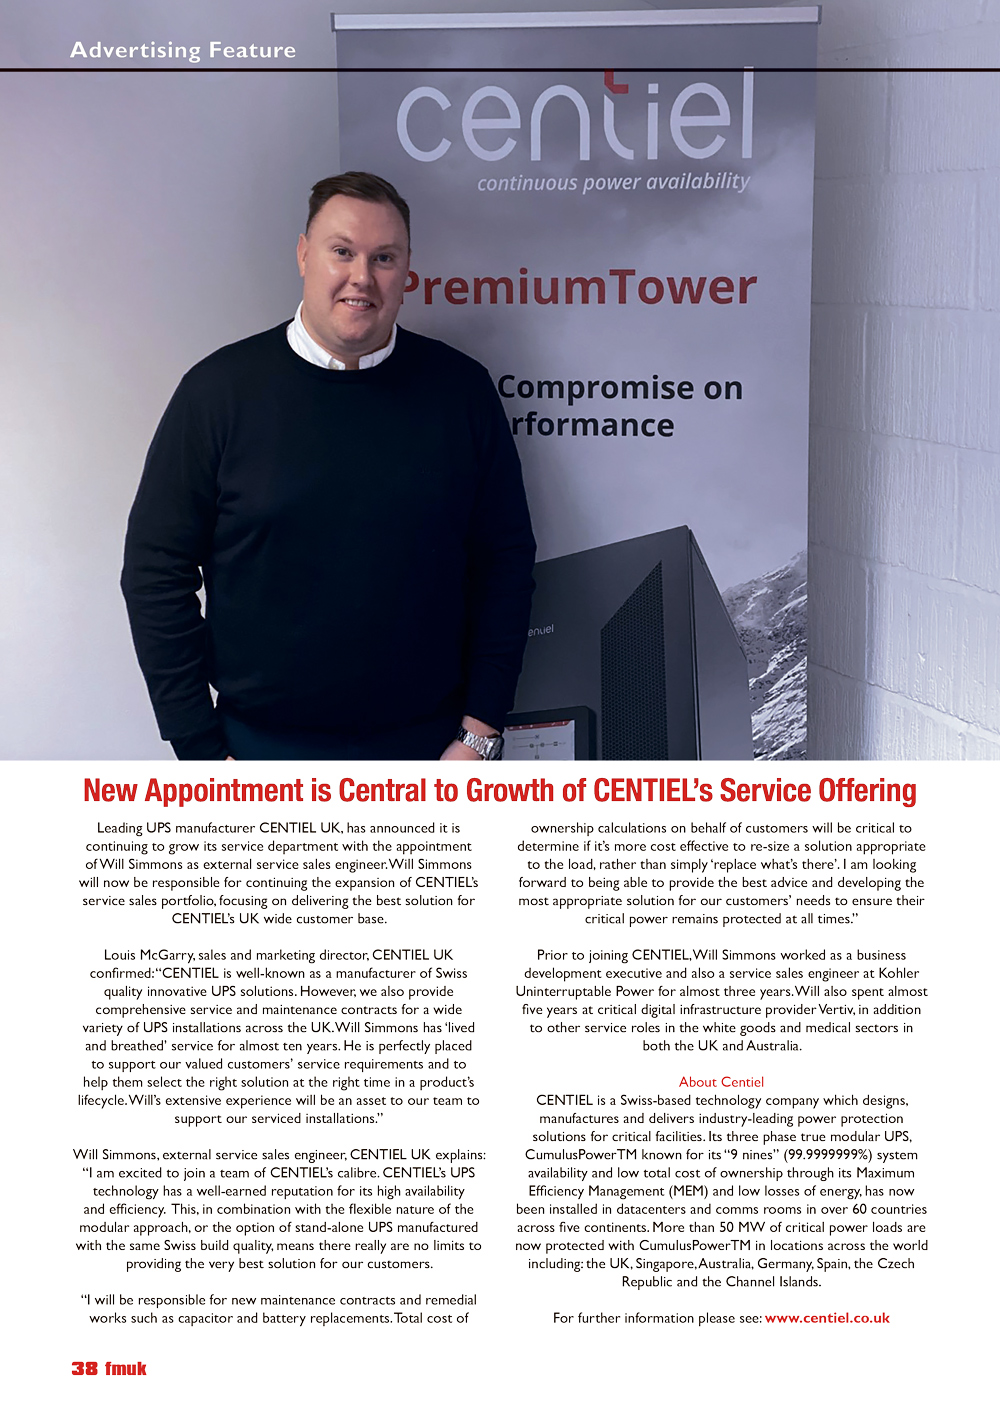 New Appointment Is Central To Growth Of CENTIEL’s Service Offering